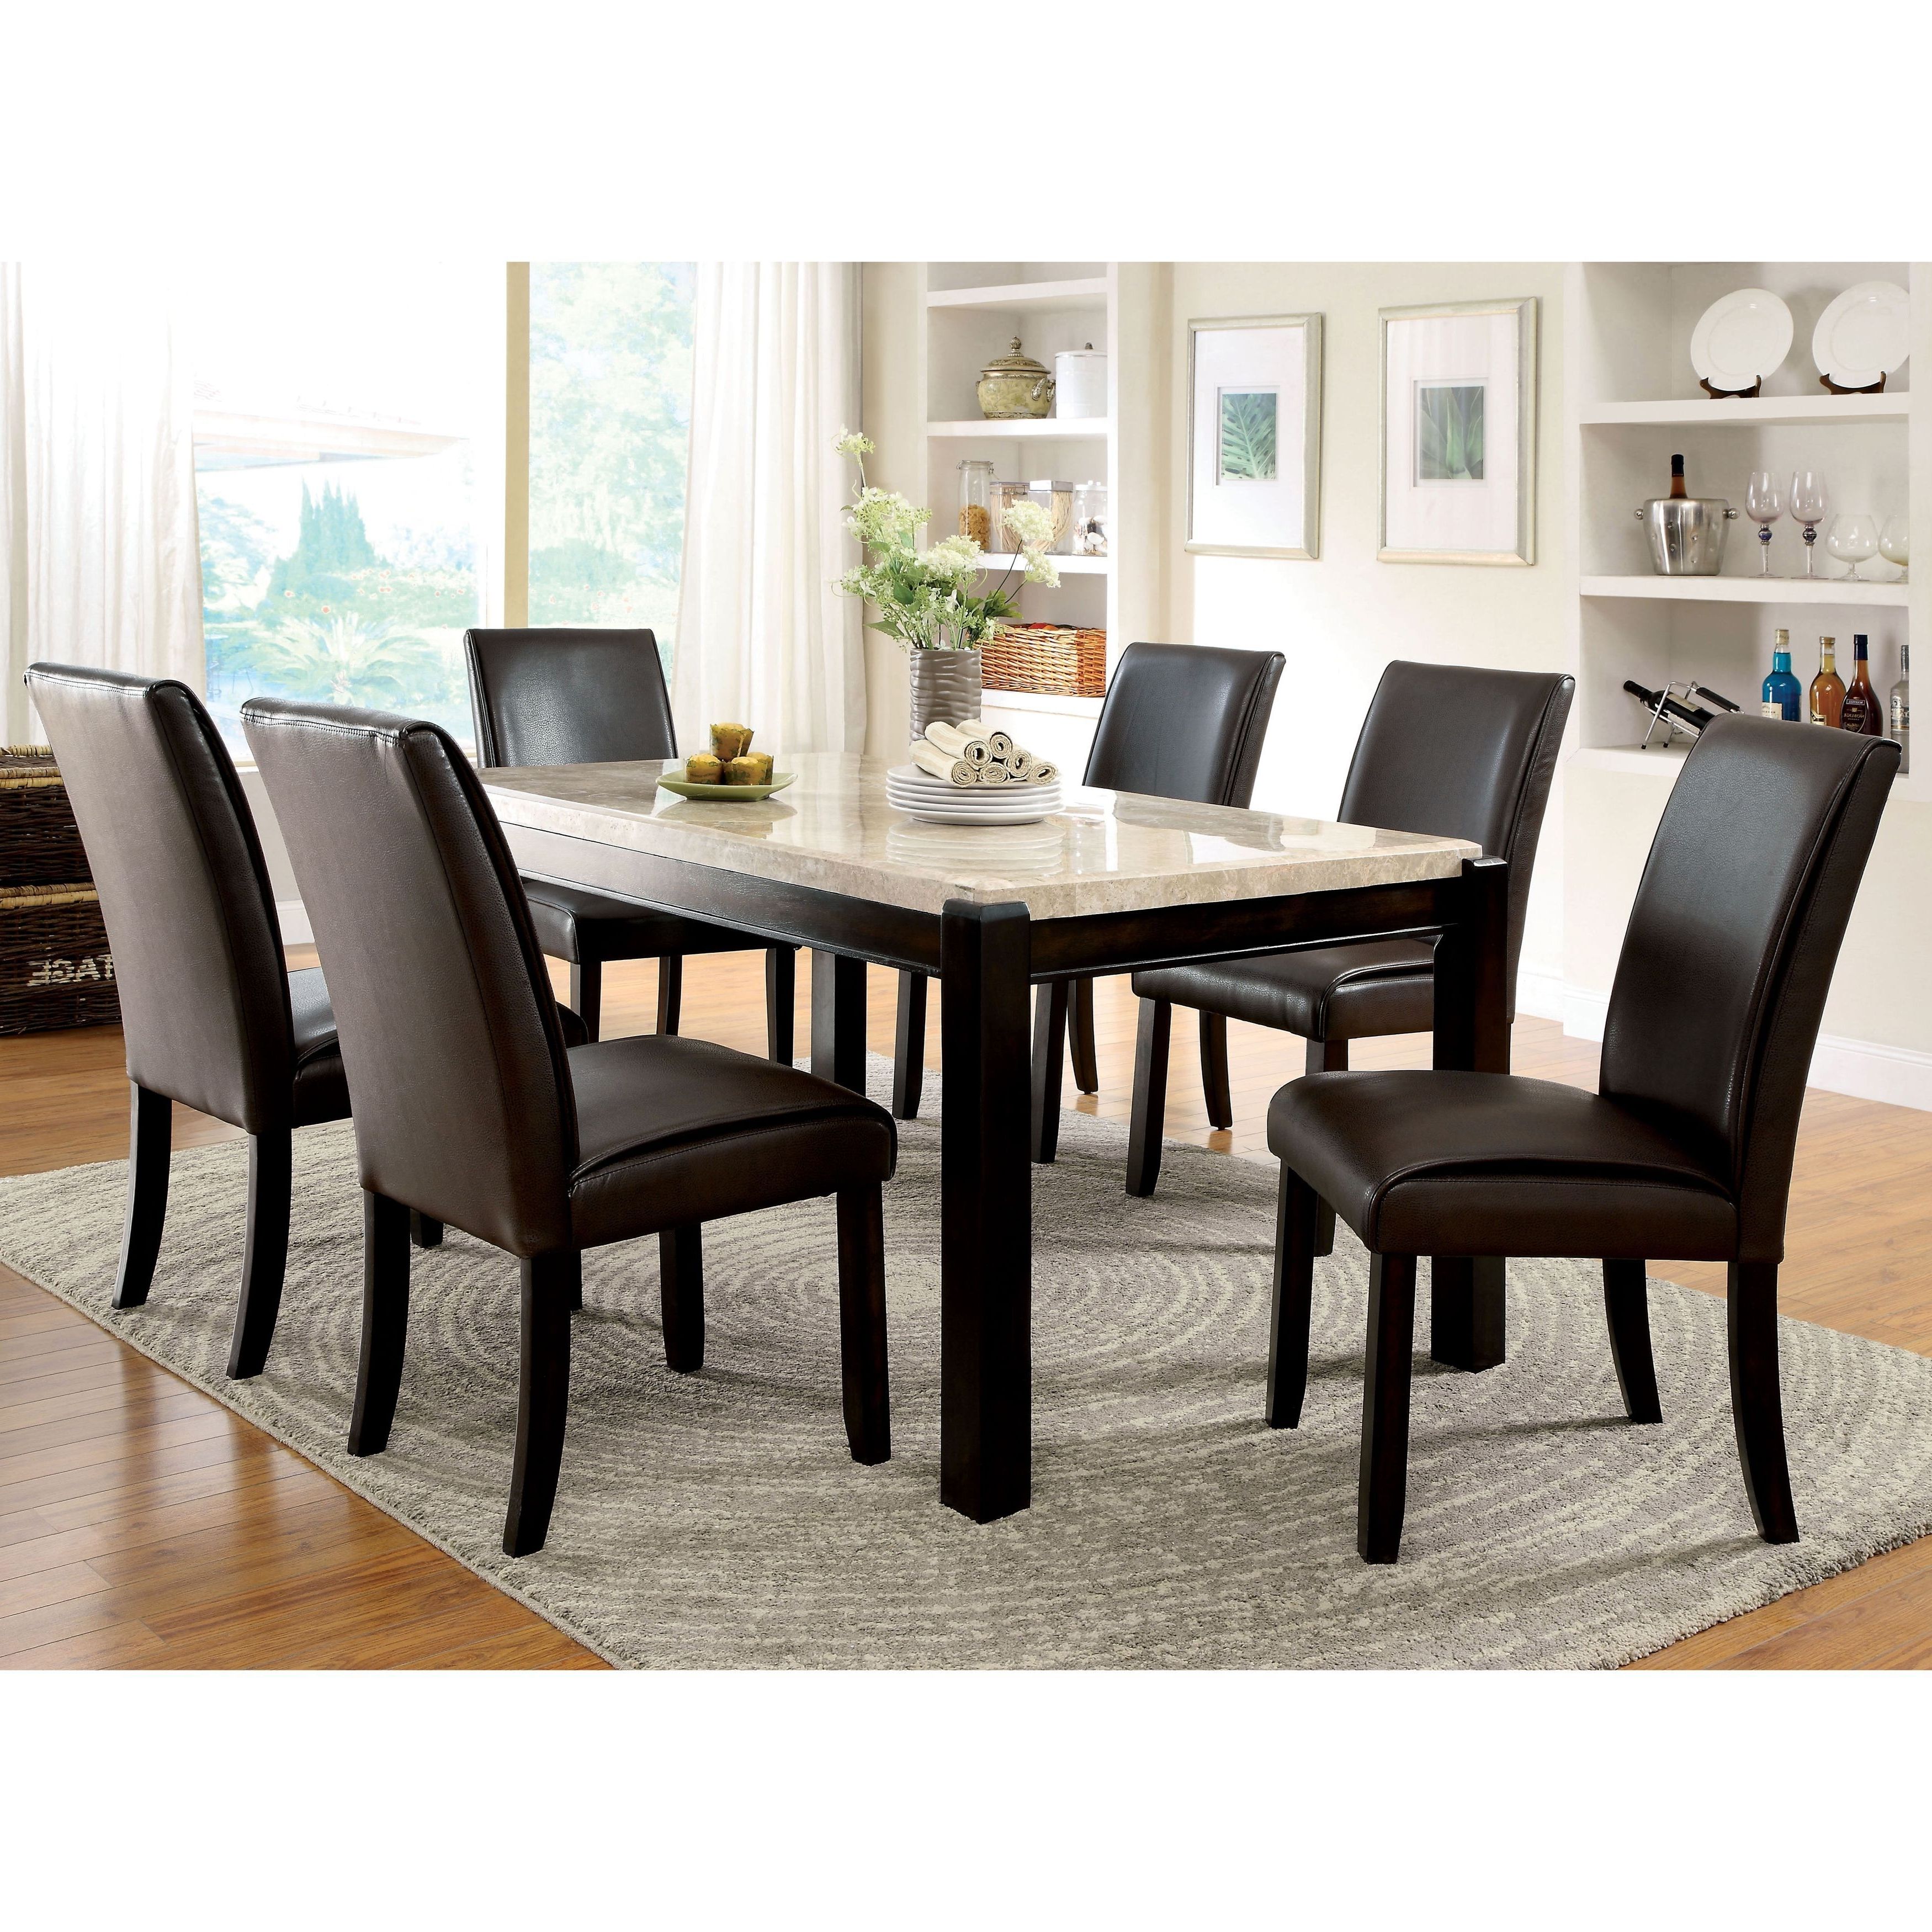 Furniture Of America Joreth 7 Piece Dark Walnut (brown) Dining Set For Best And Newest Palazzo 6 Piece Rectangle Dining Sets With Joss Side Chairs (View 11 of 25)